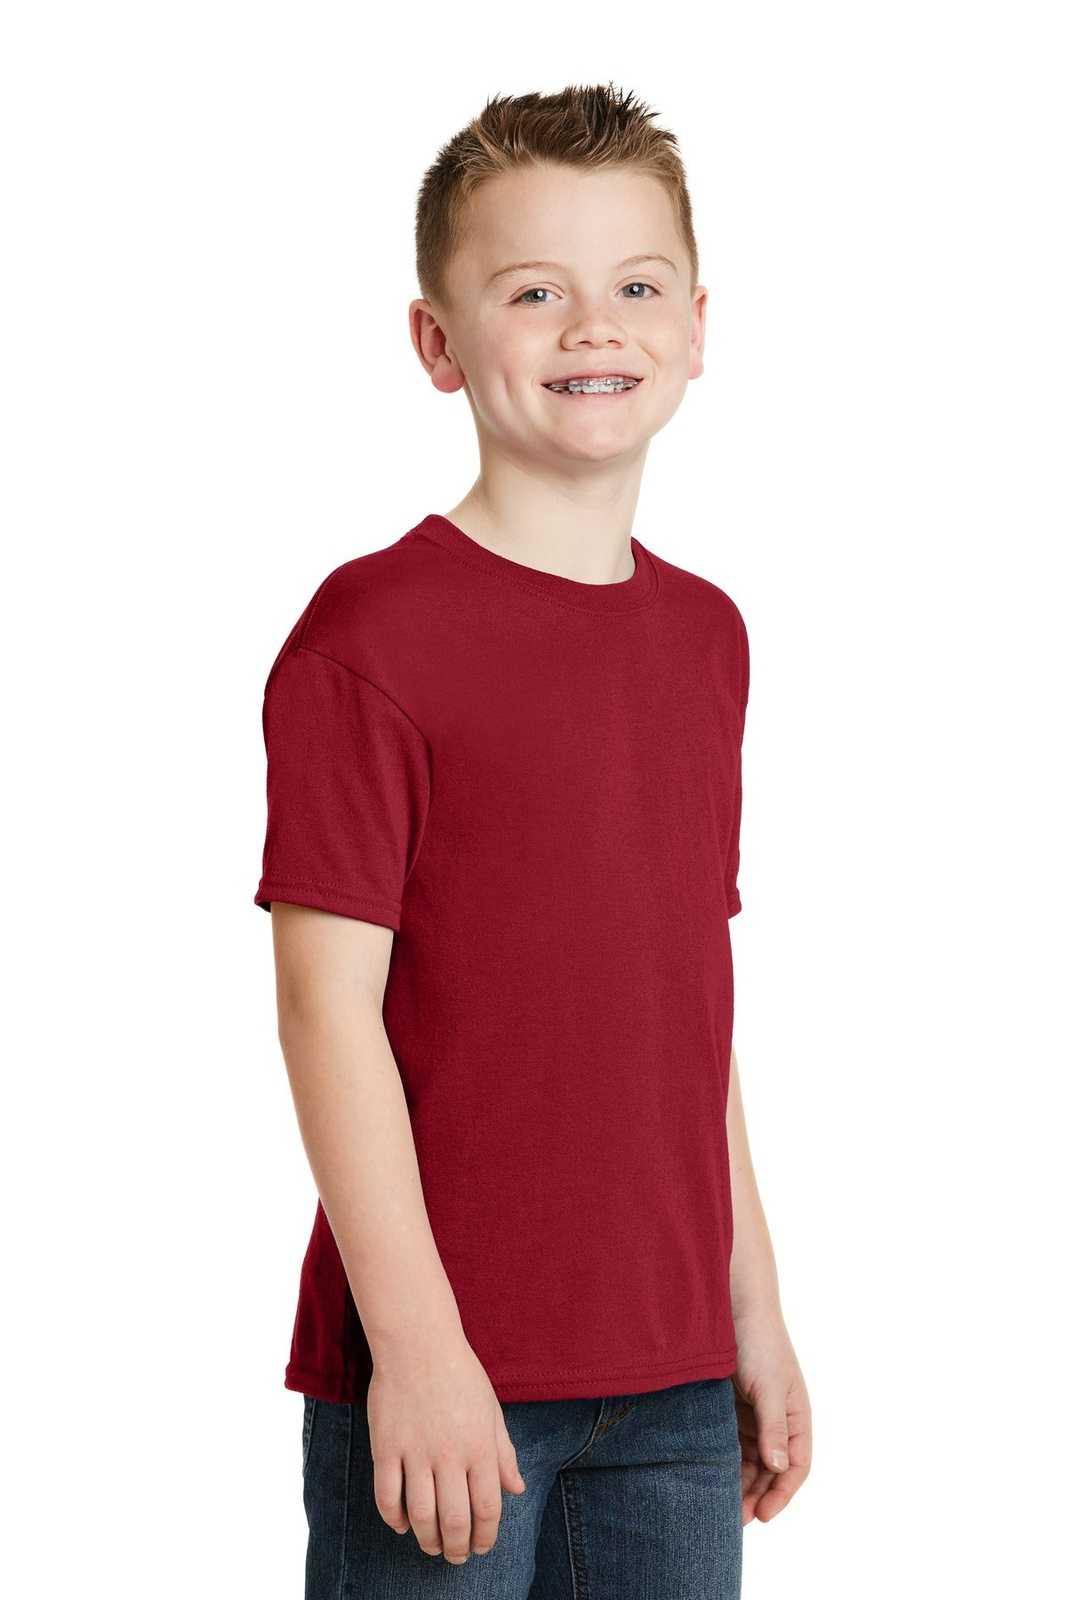 Hanes 5370 Youth Ecosmart 50/50 Cotton/Poly T-Shirt - Deep Red - HIT a Double